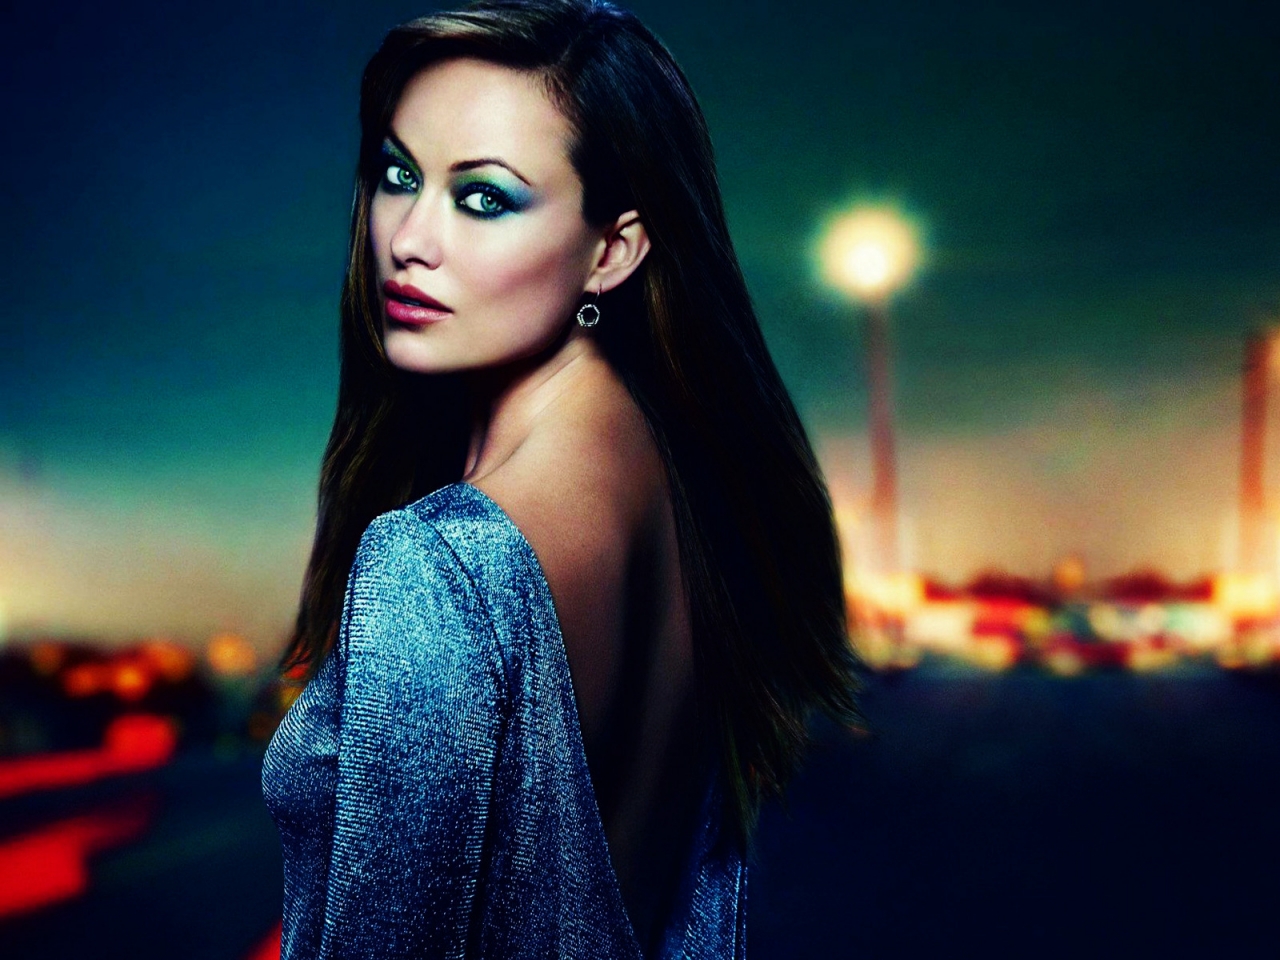 Olivia Wilde Profile Look for 1280 x 960 resolution